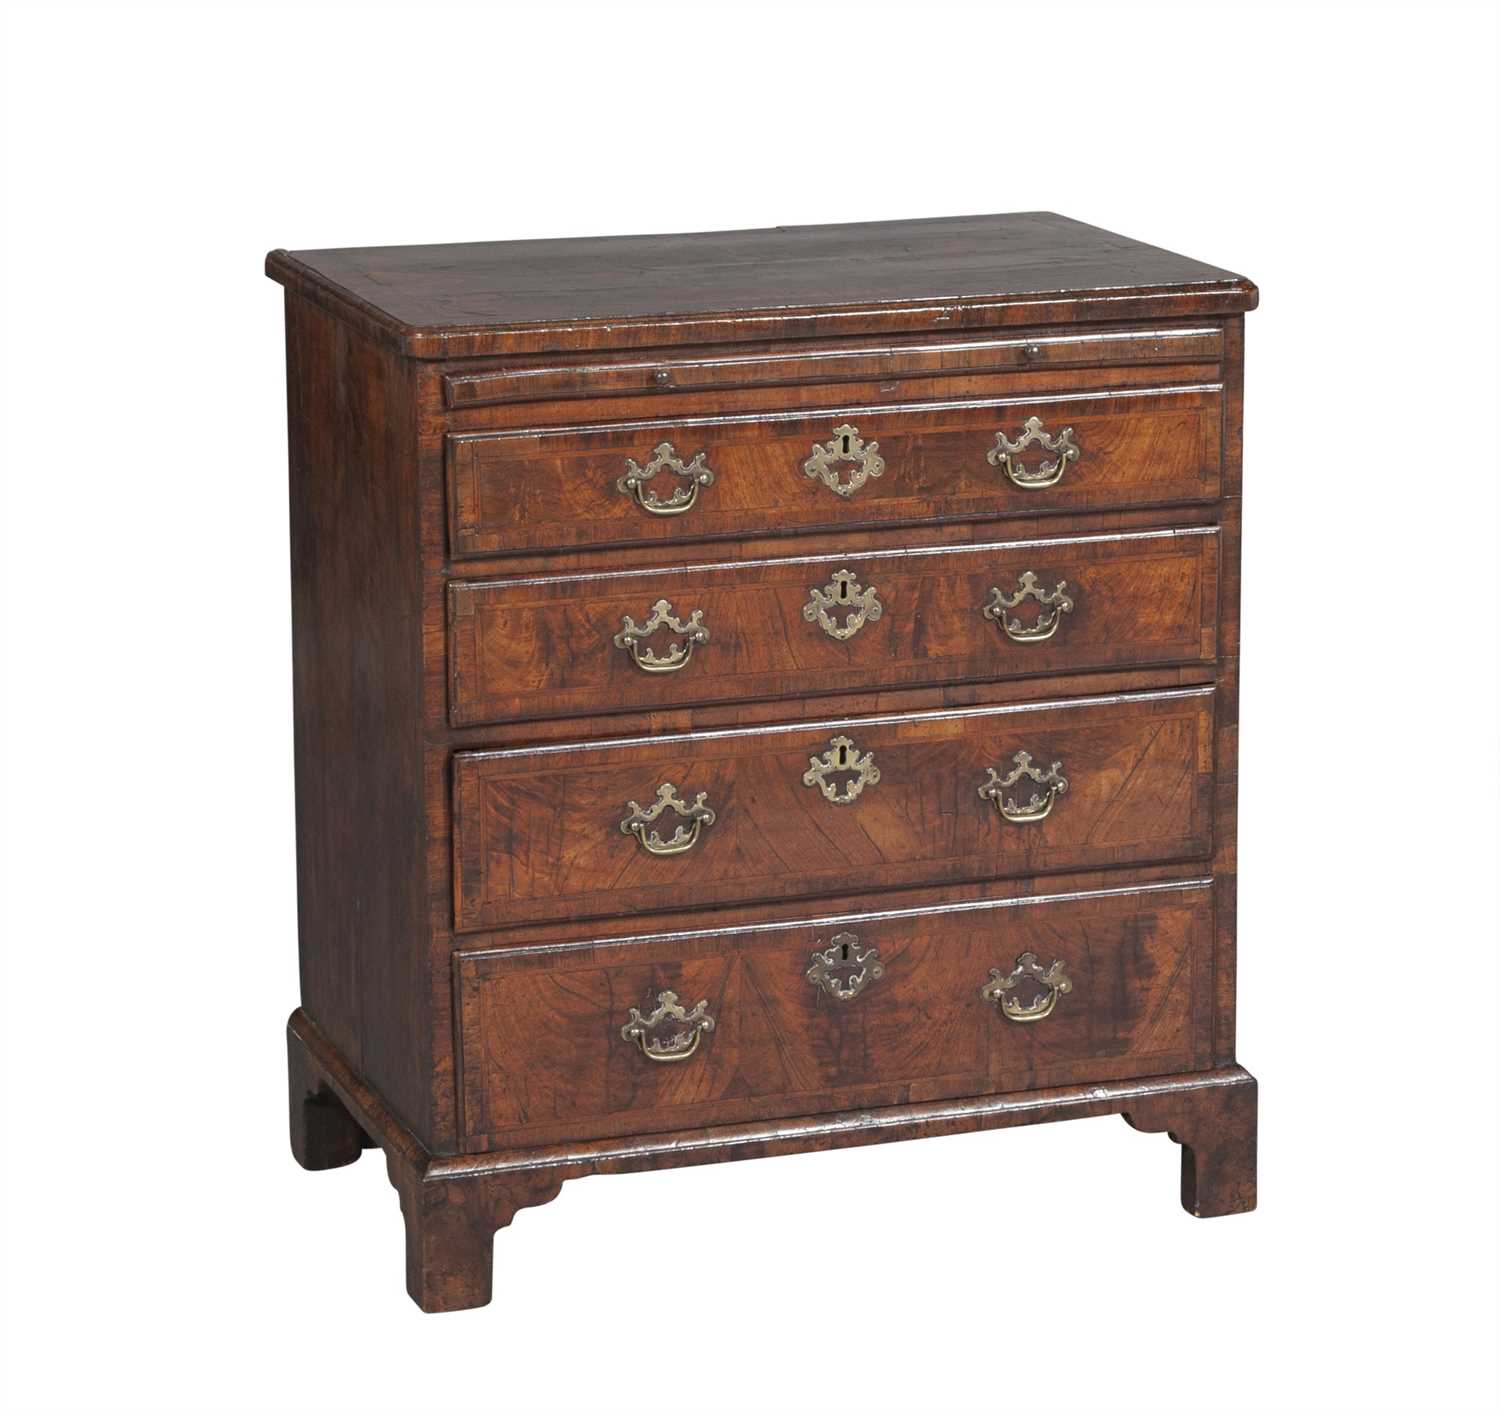 Lot 101 - George II Style Inlaid Walnut Bachelor's Chest